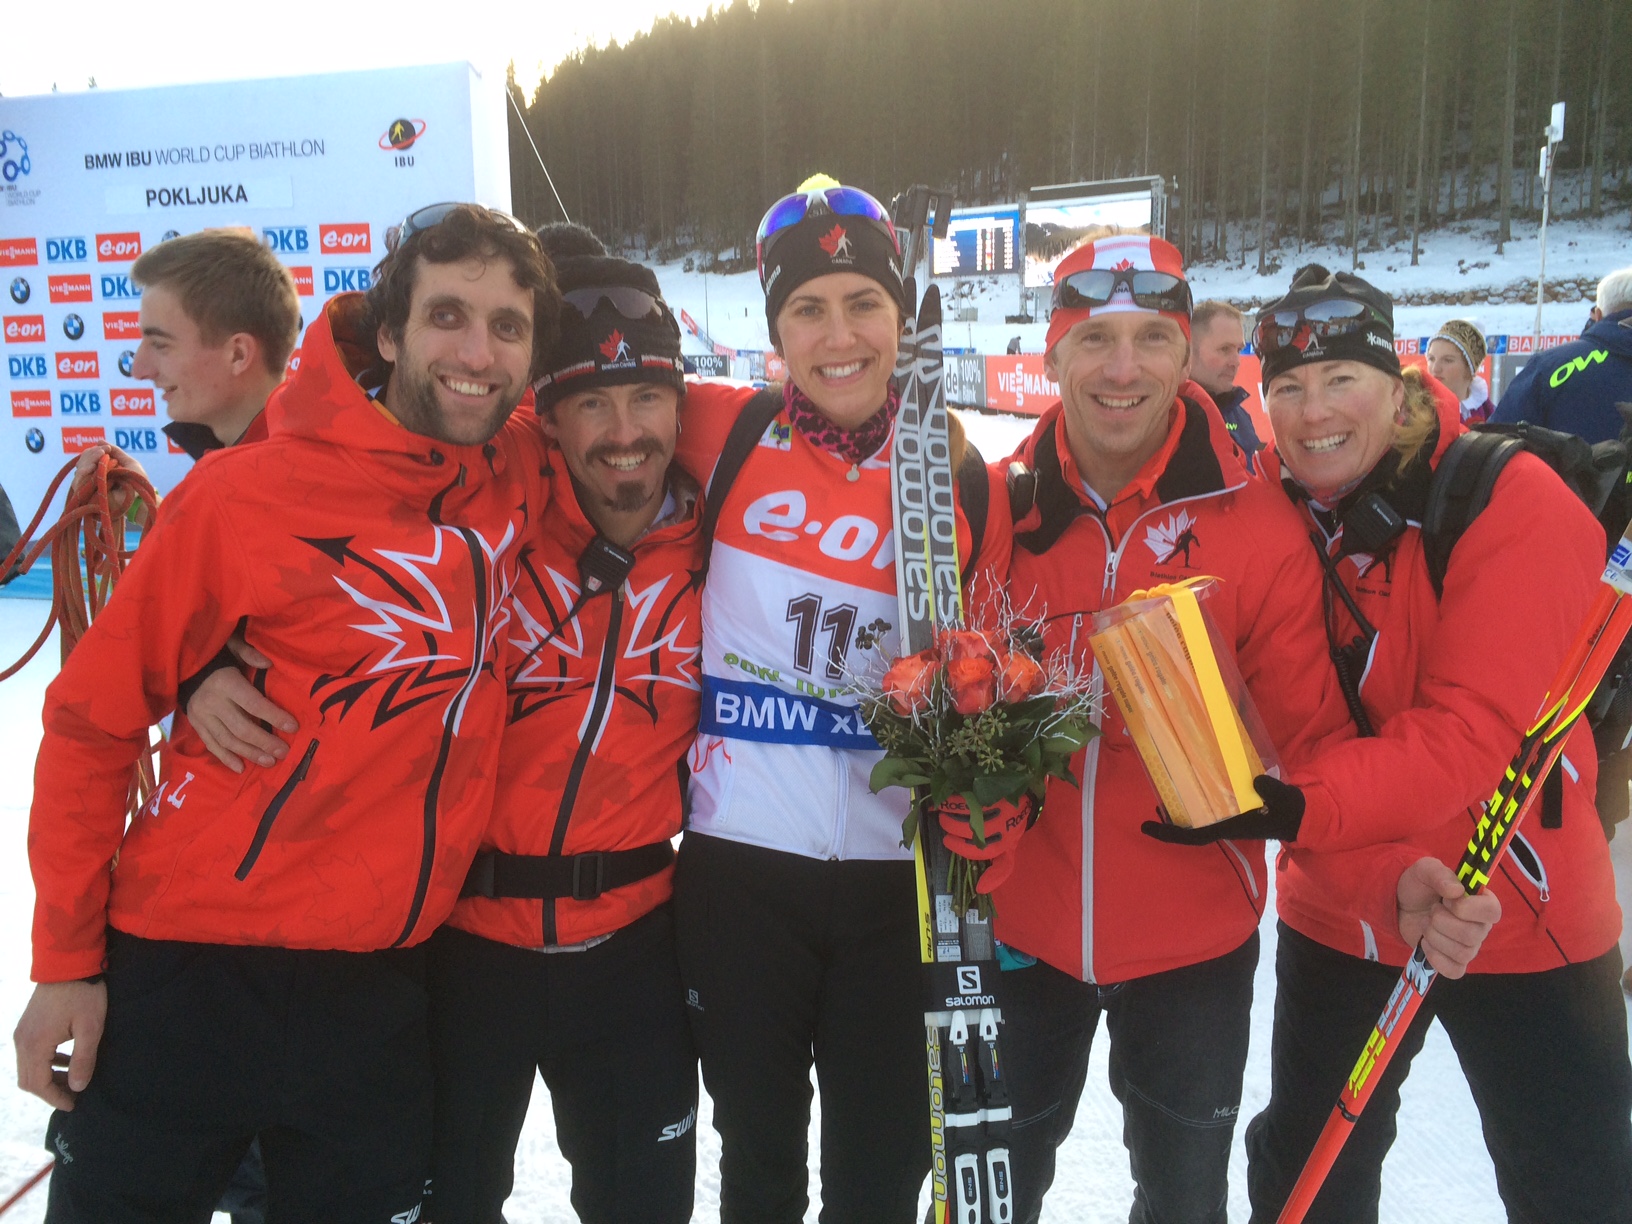 Canada's Rosanna Crawford (center) after finishing fourth in today's World Cup sprint with, l-r, ski technicians Raphael Grosset, Tom Zidek, and Pavel Stolba, and physio Yvonne Visser. Photo: Matthias Ahrens.